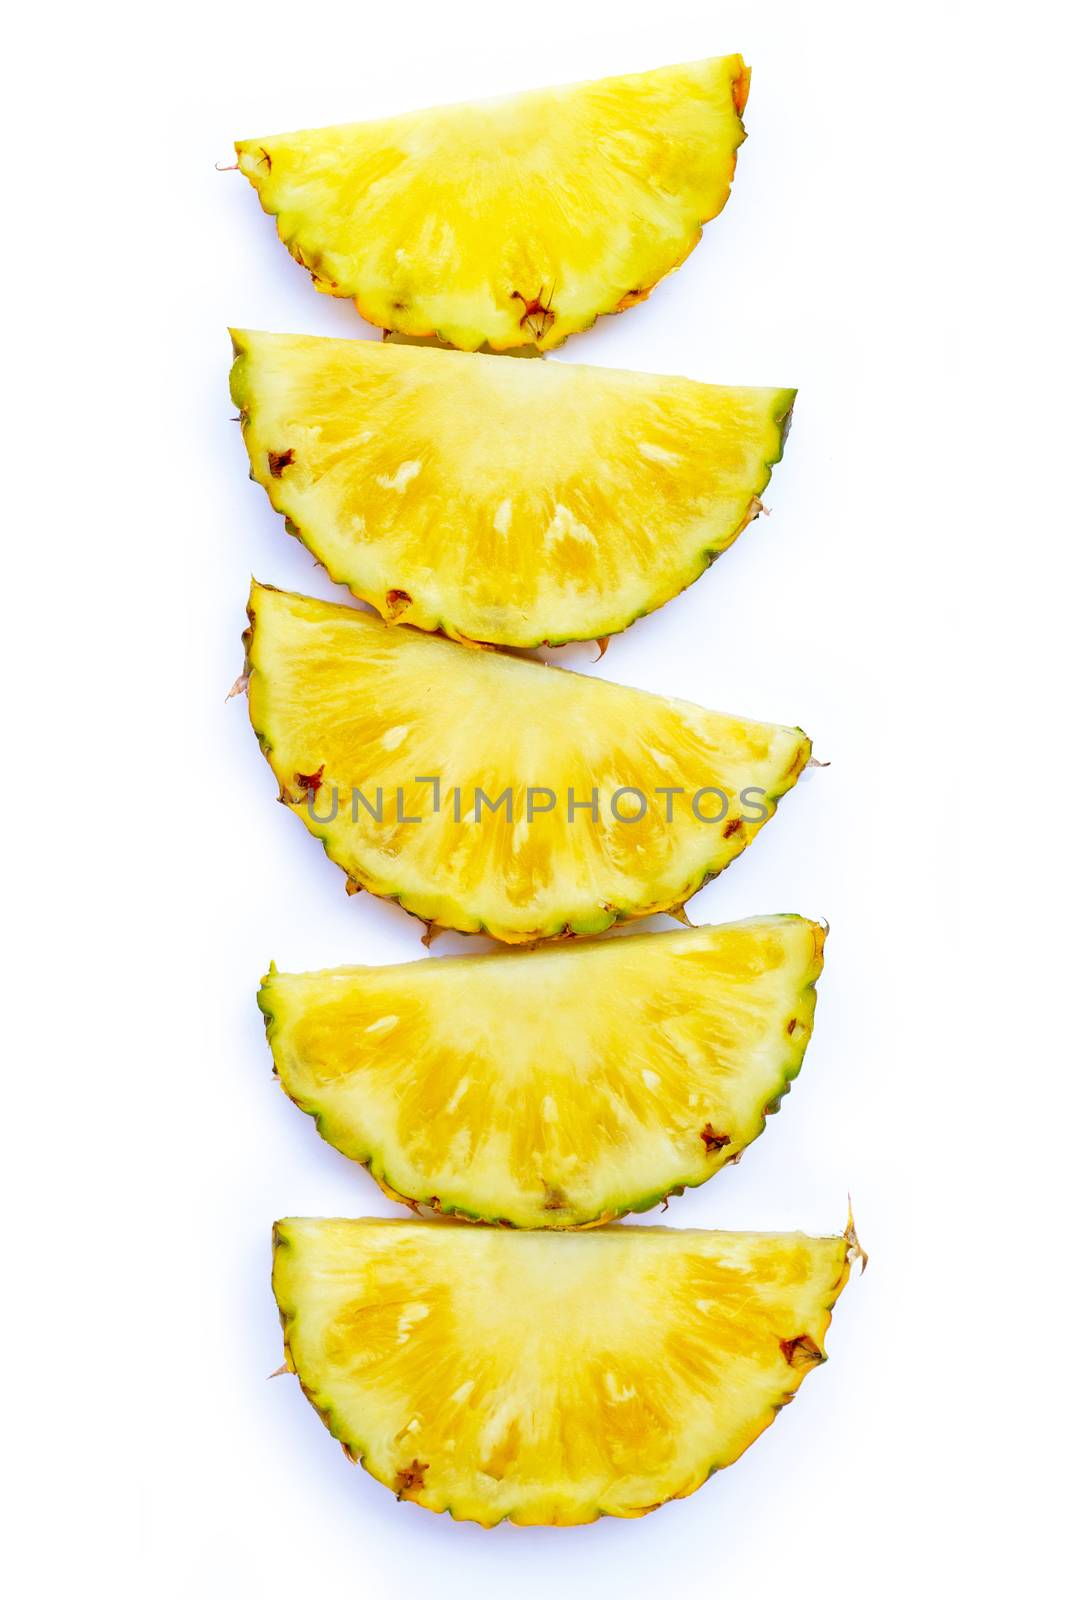 Fresh pineapple slices on white background. Top view